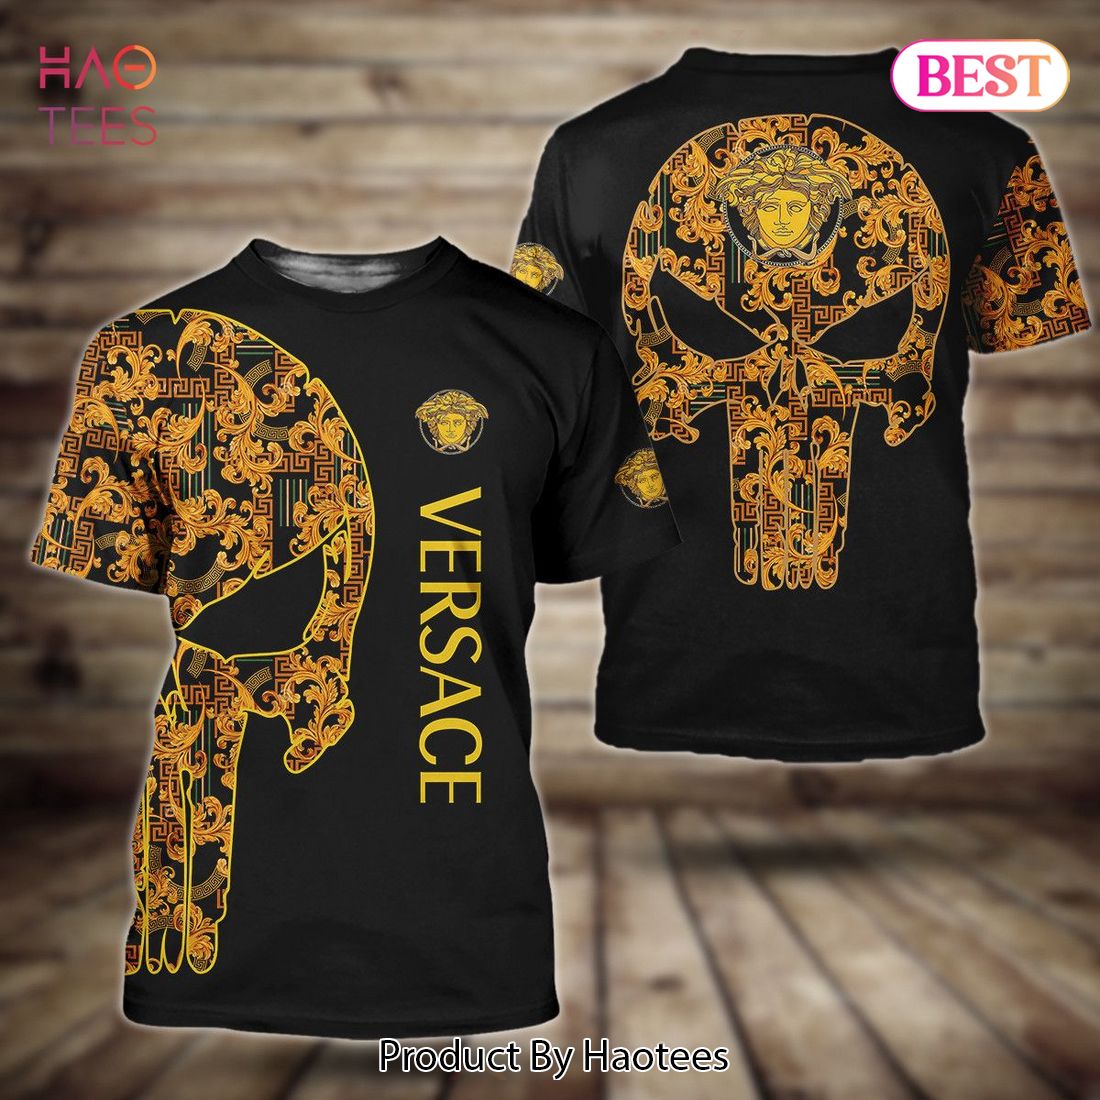 HOT Versace Black Mix Gold Luxury Brand 3D T-Shirt Limited Edition